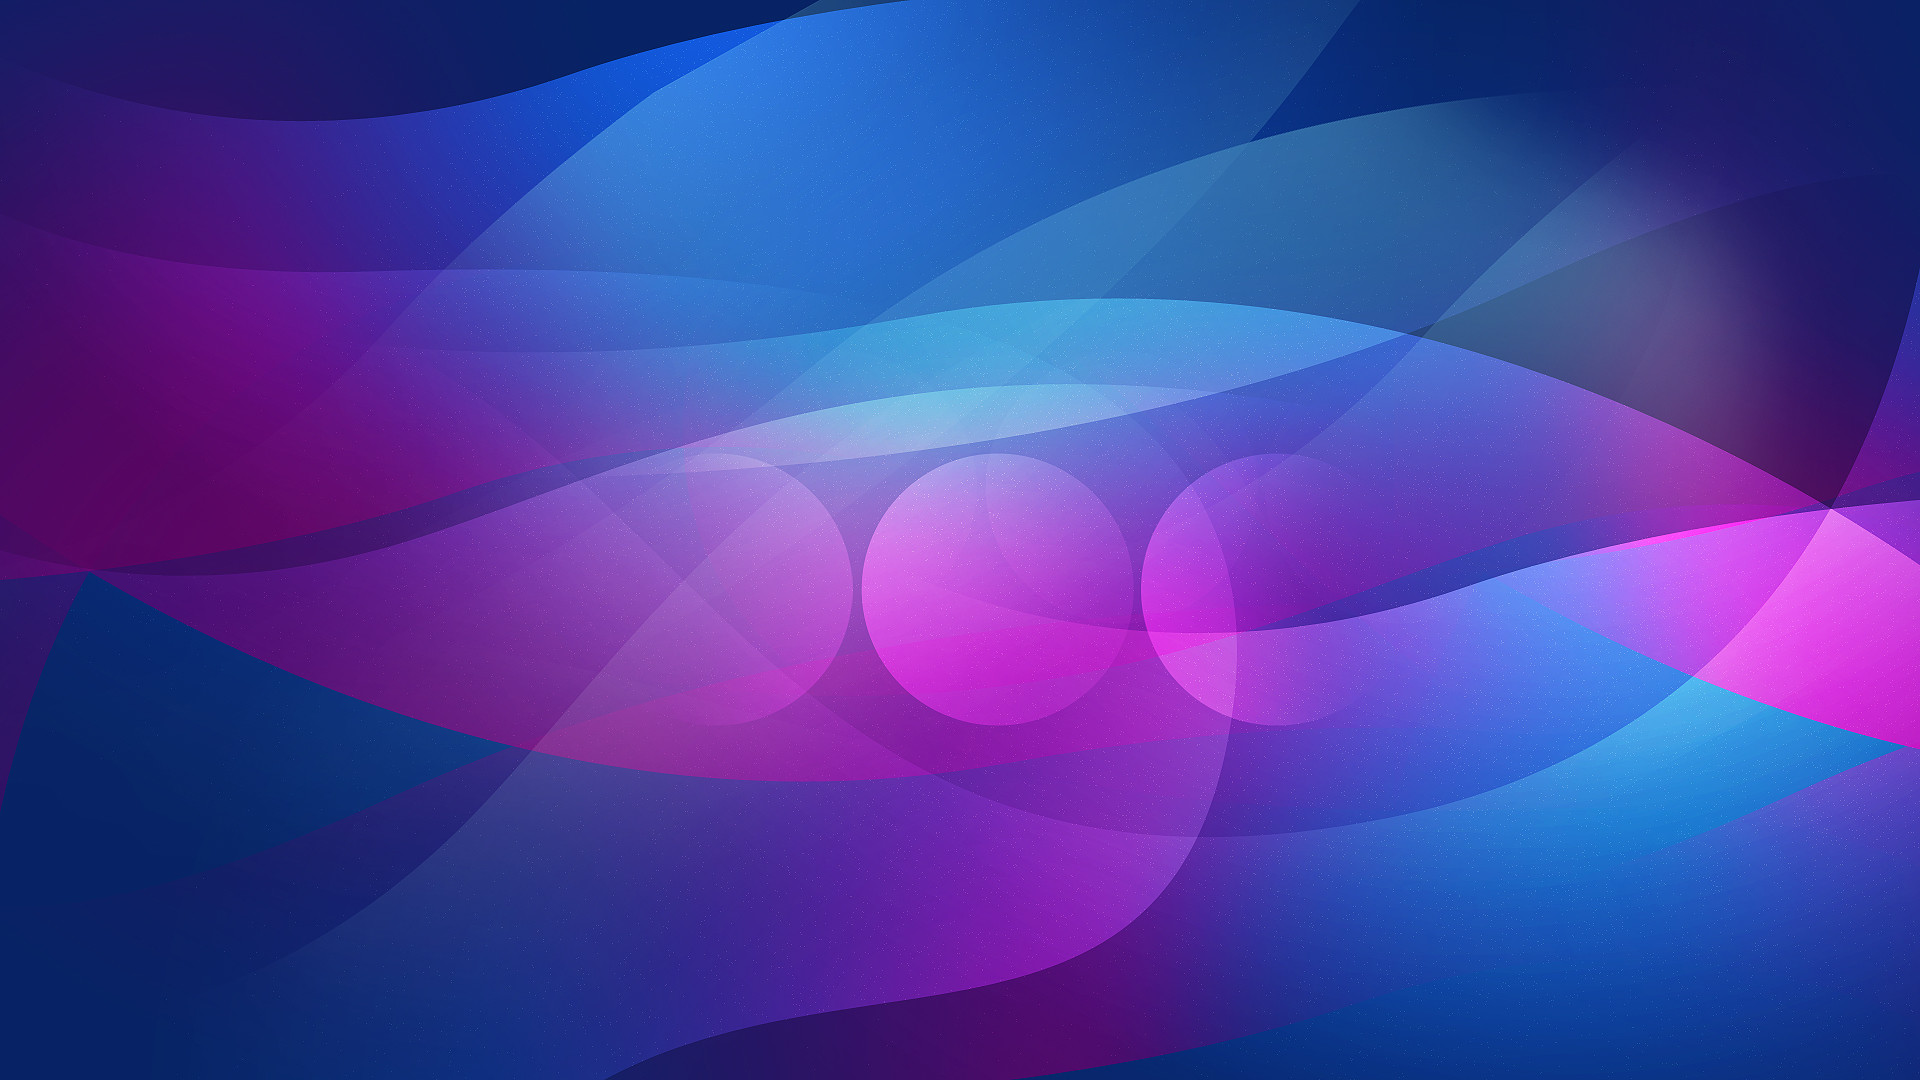 Wallpaper, Abstract, Blue, Circles, Pink, Line, Cool, Colourful,